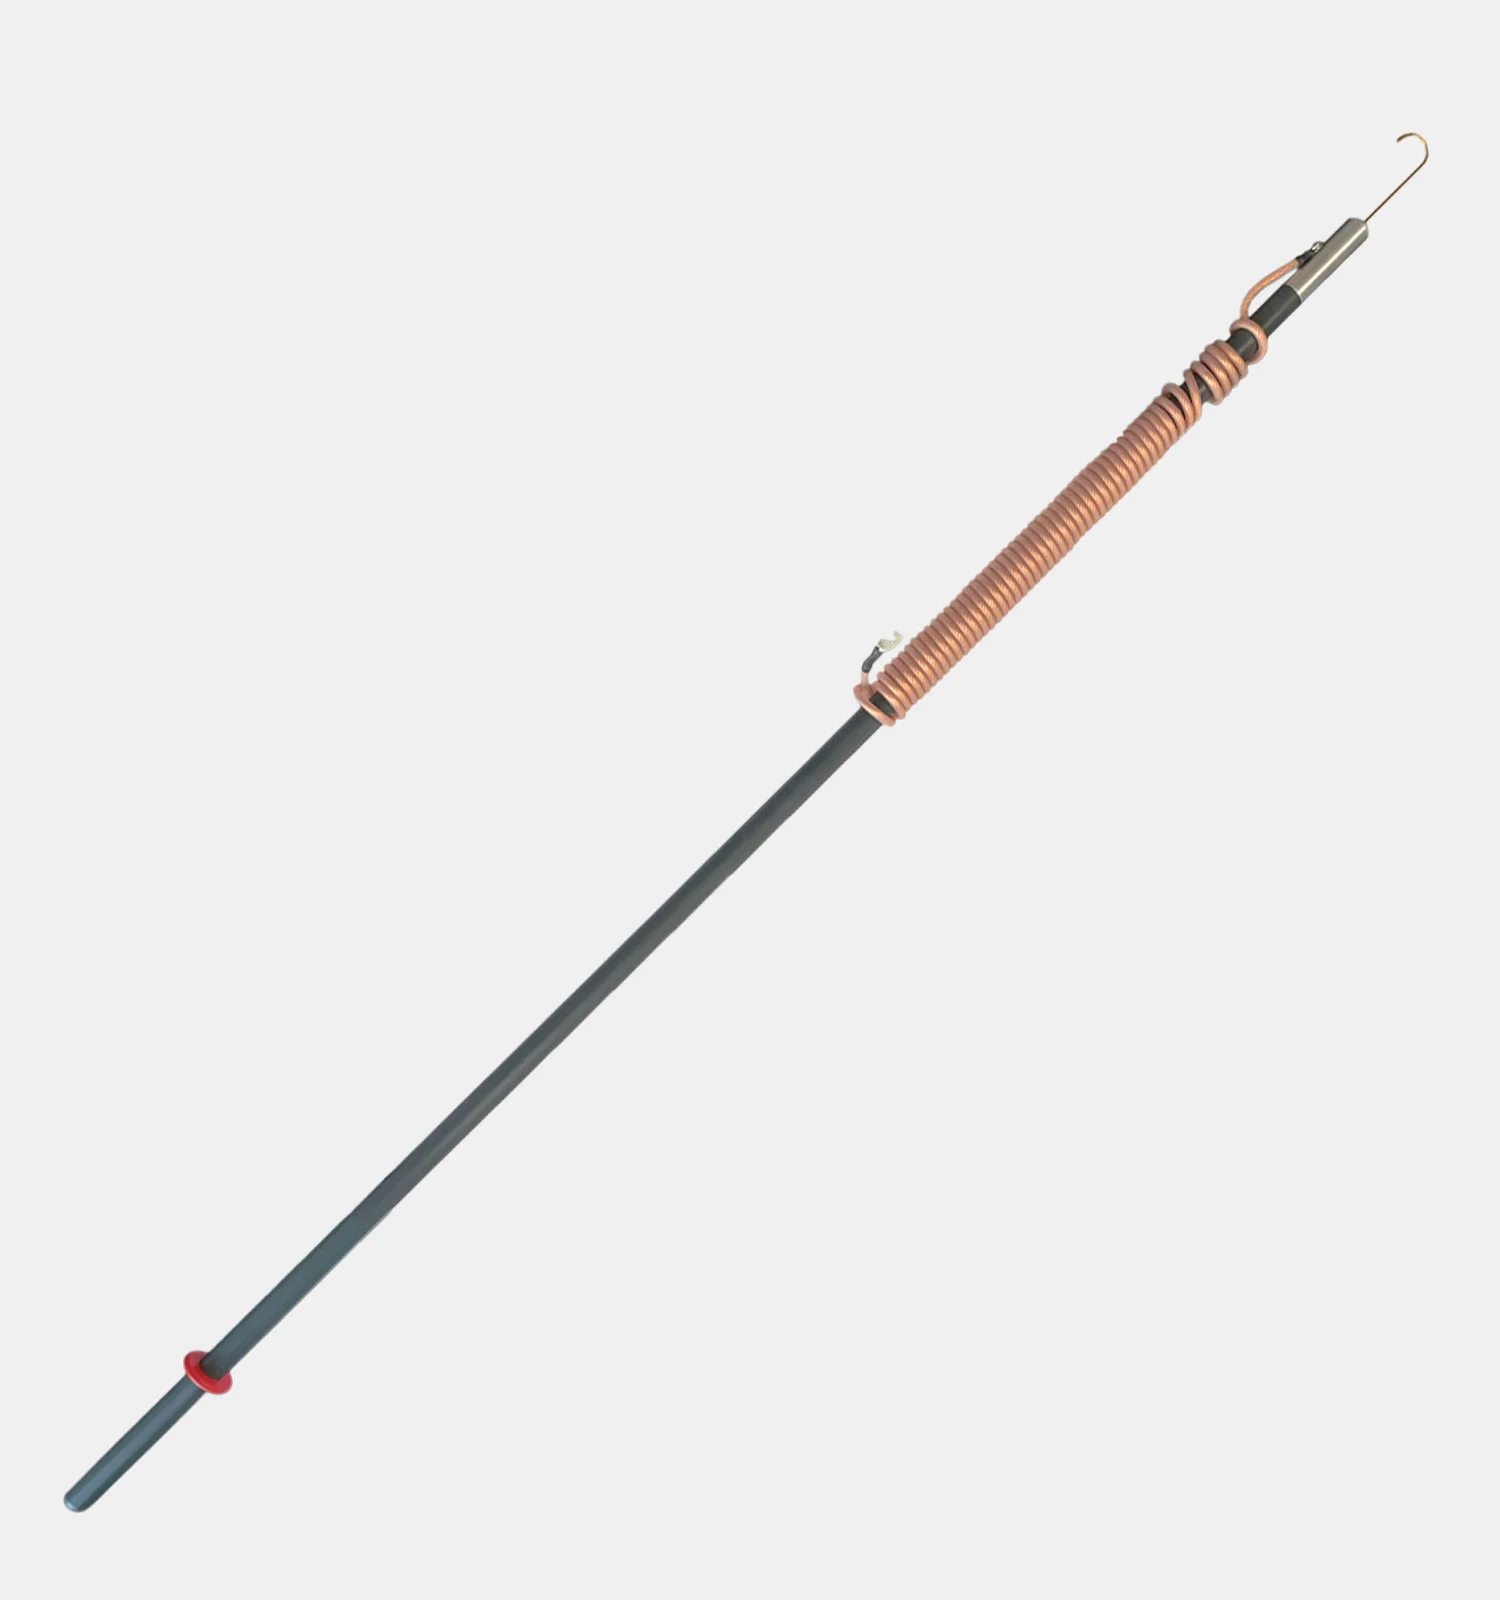 Suppliers of ES100 Earthing Stick UK